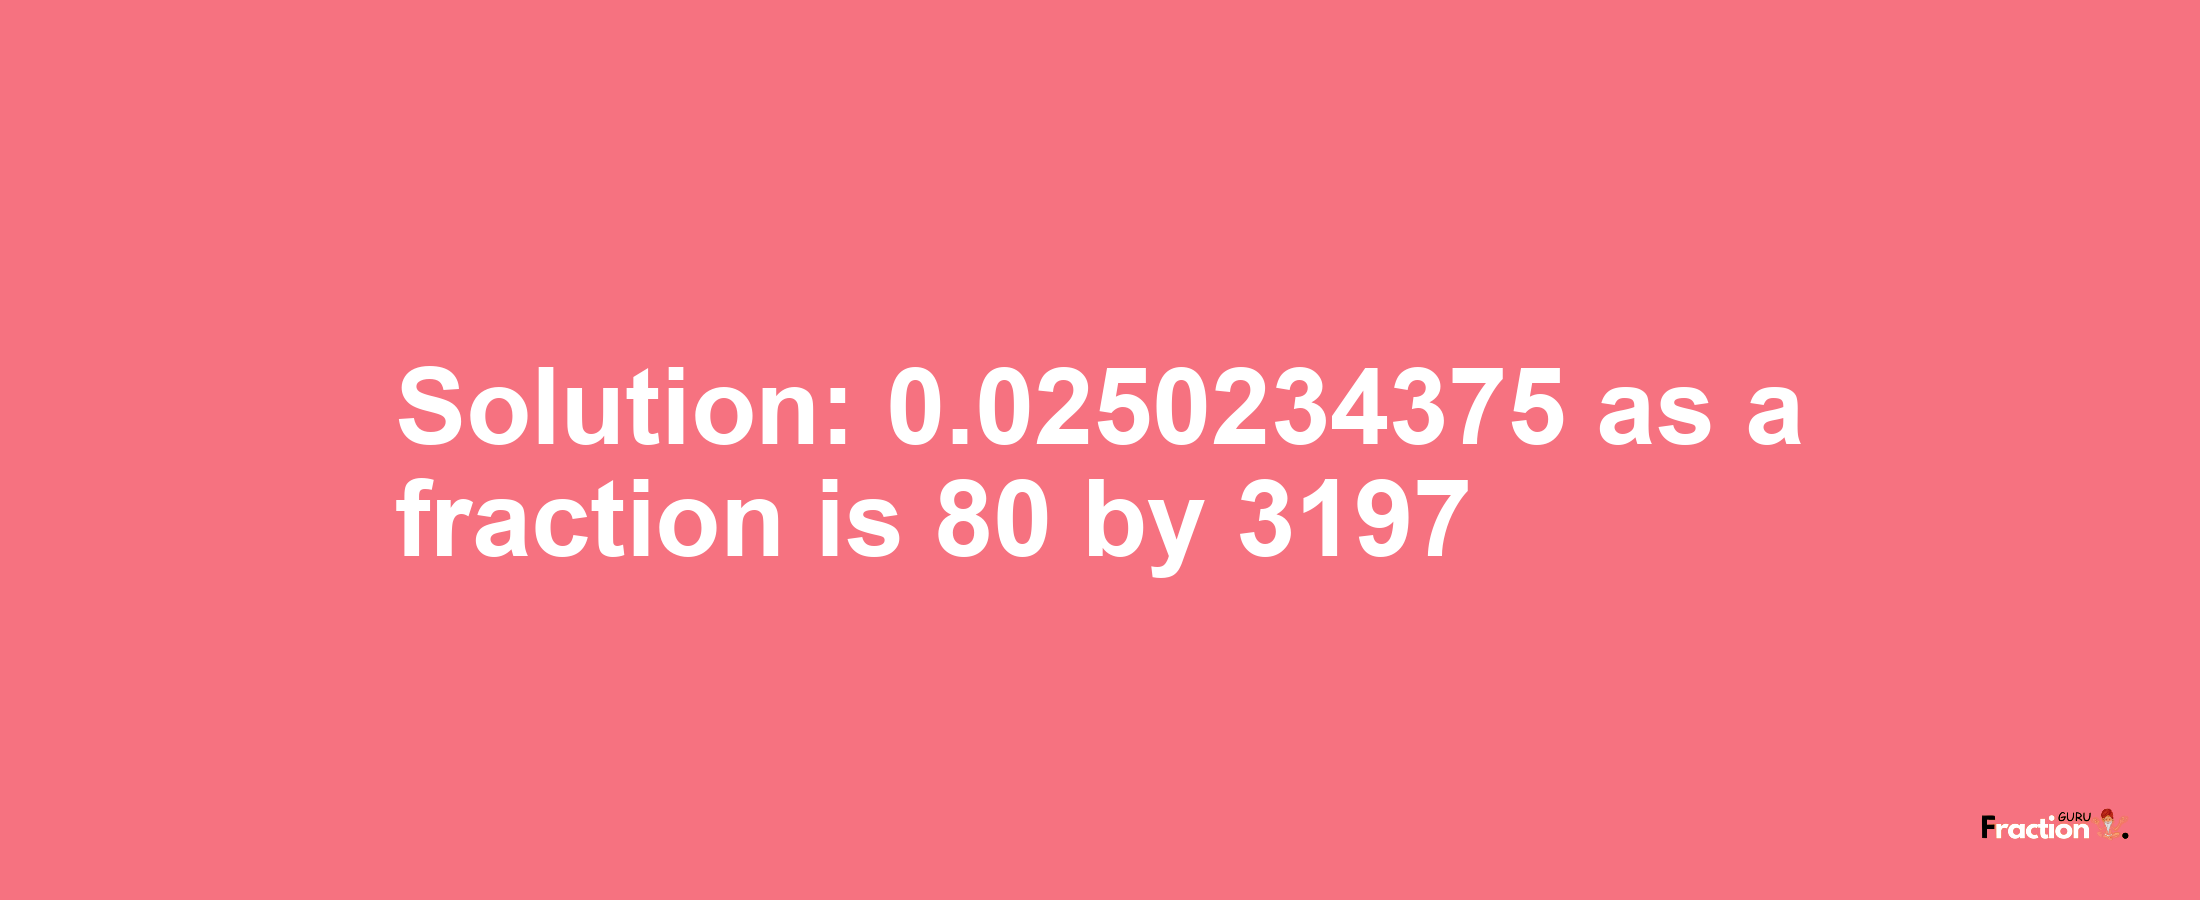 Solution:0.0250234375 as a fraction is 80/3197